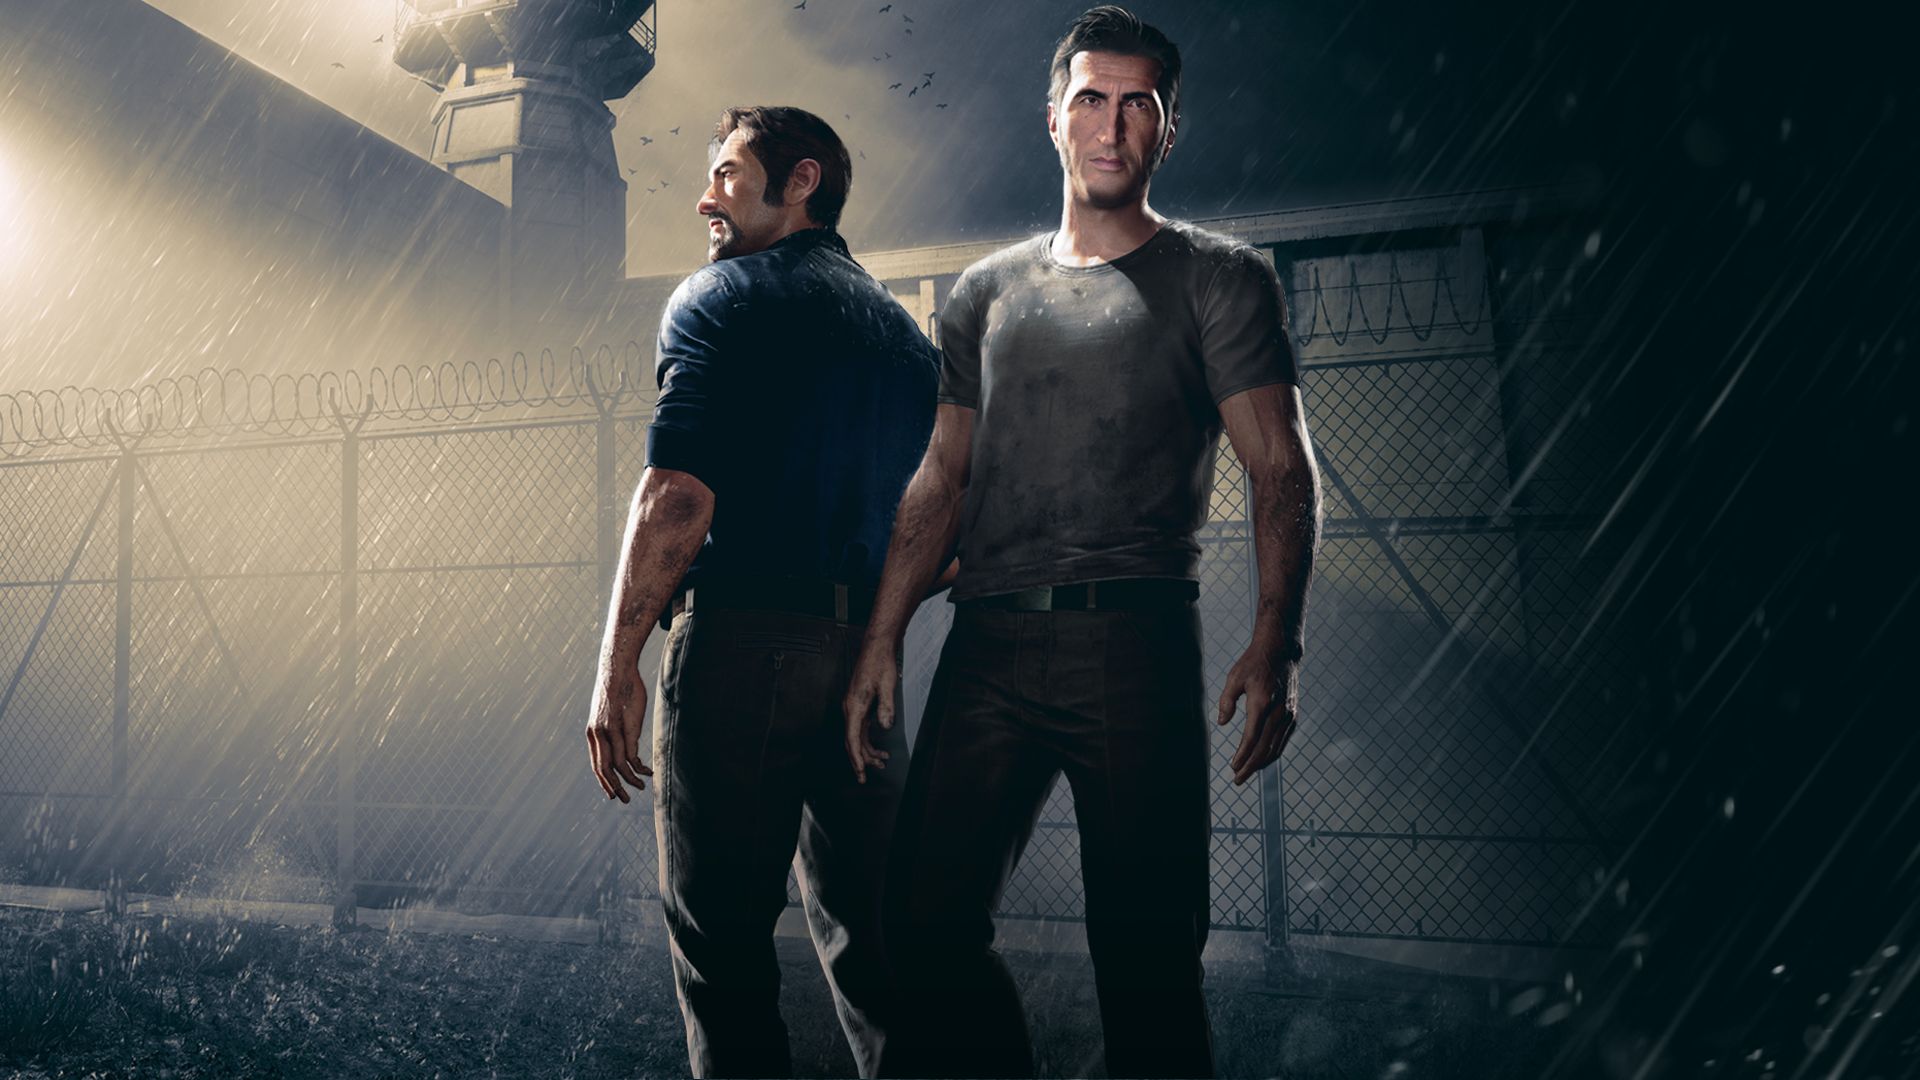 Video Game A Way Out HD Wallpaper | Background Image